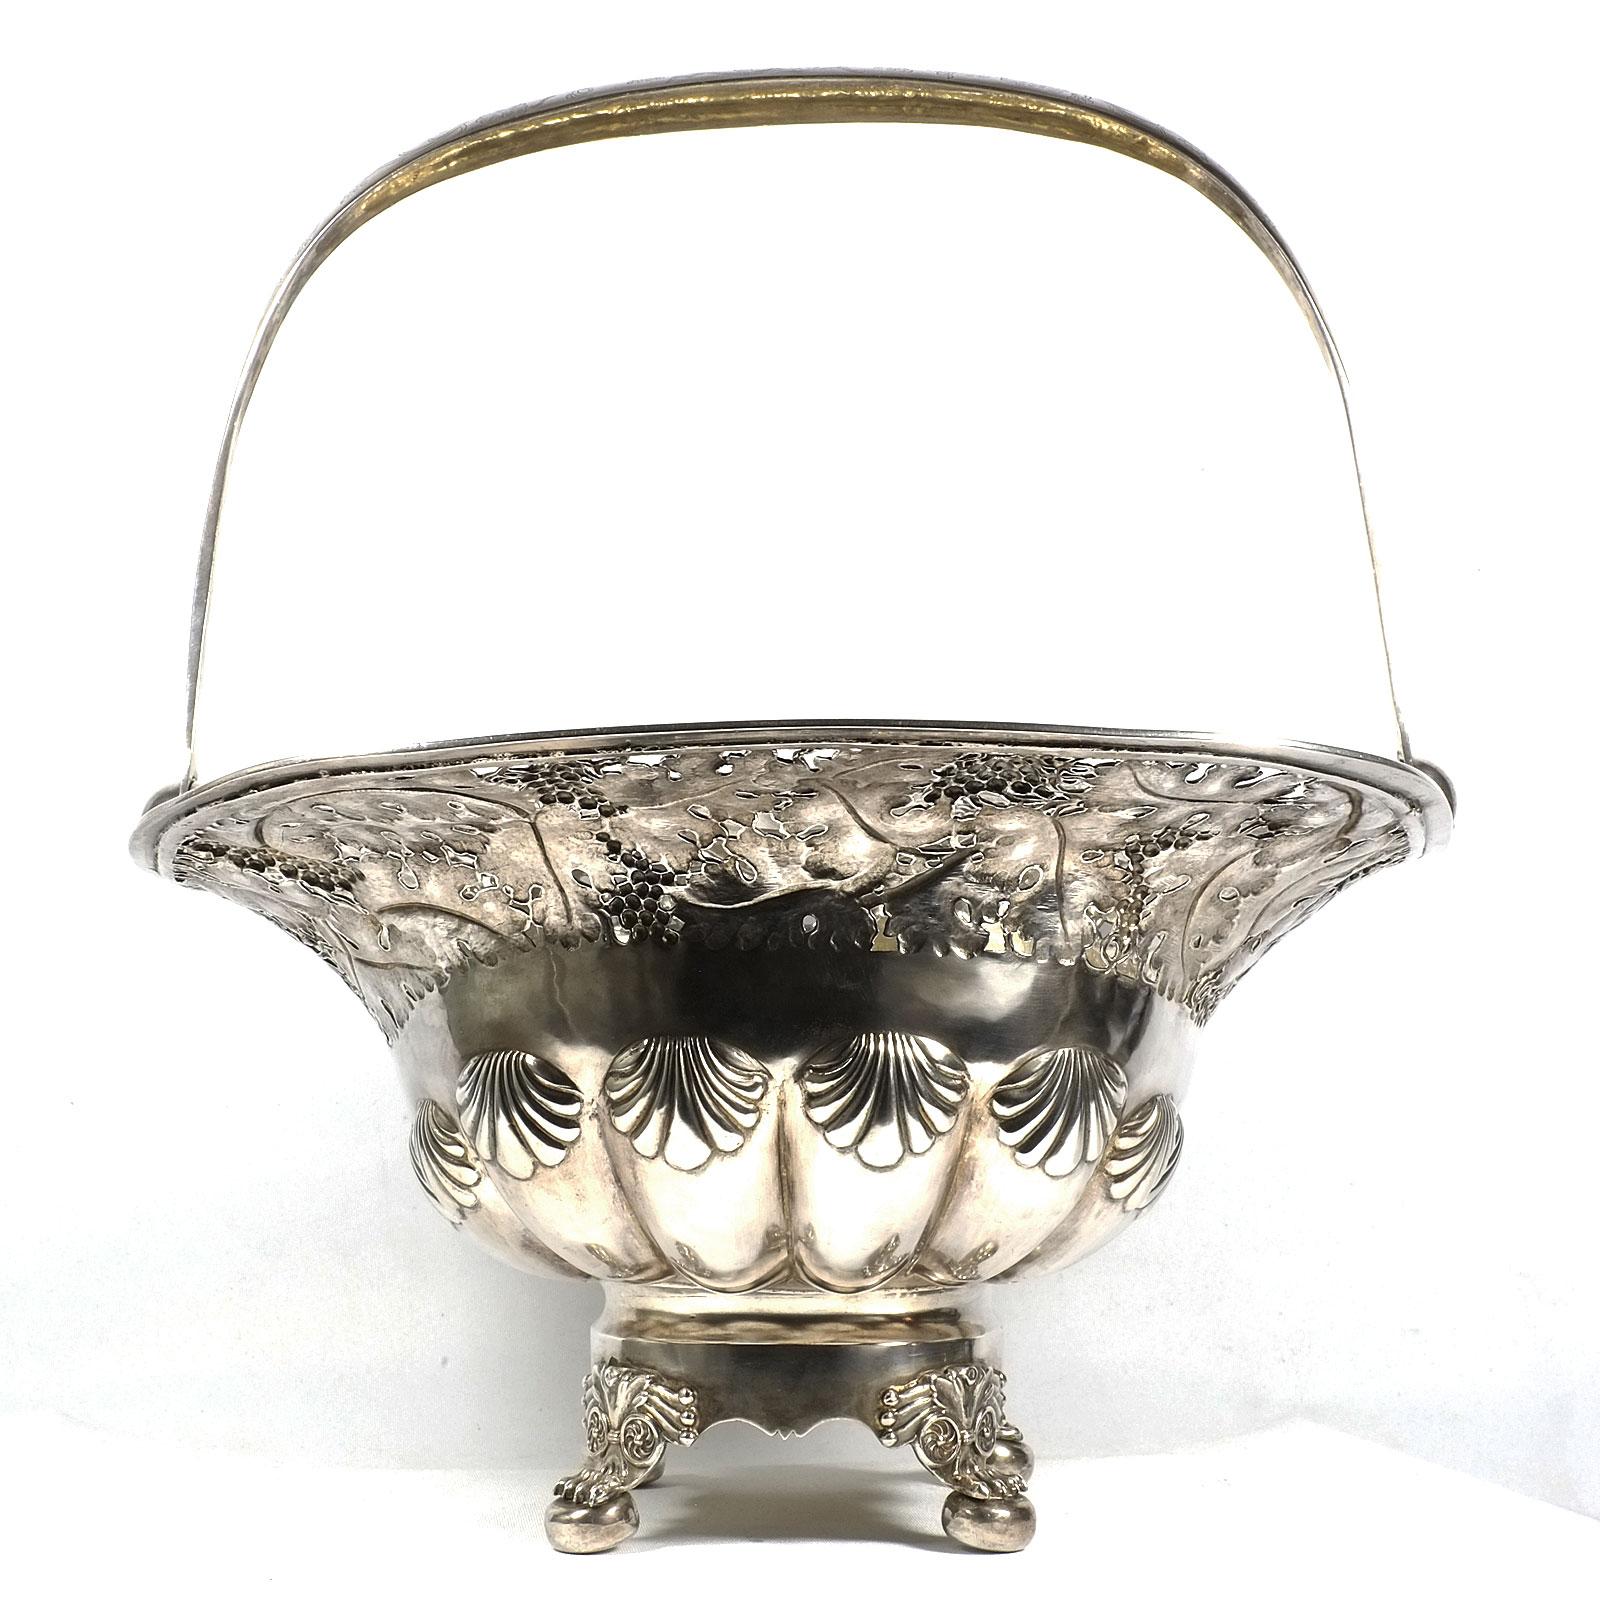 Antique German Biedermeier Silver Basket, dated 1828

Very decorative silver basket on rectangular stand on four paw feet, bulbous, gadrooned body with shell decoration, wide flared rim, pierced with vine leaf frieze. Overlapping, florally engraved